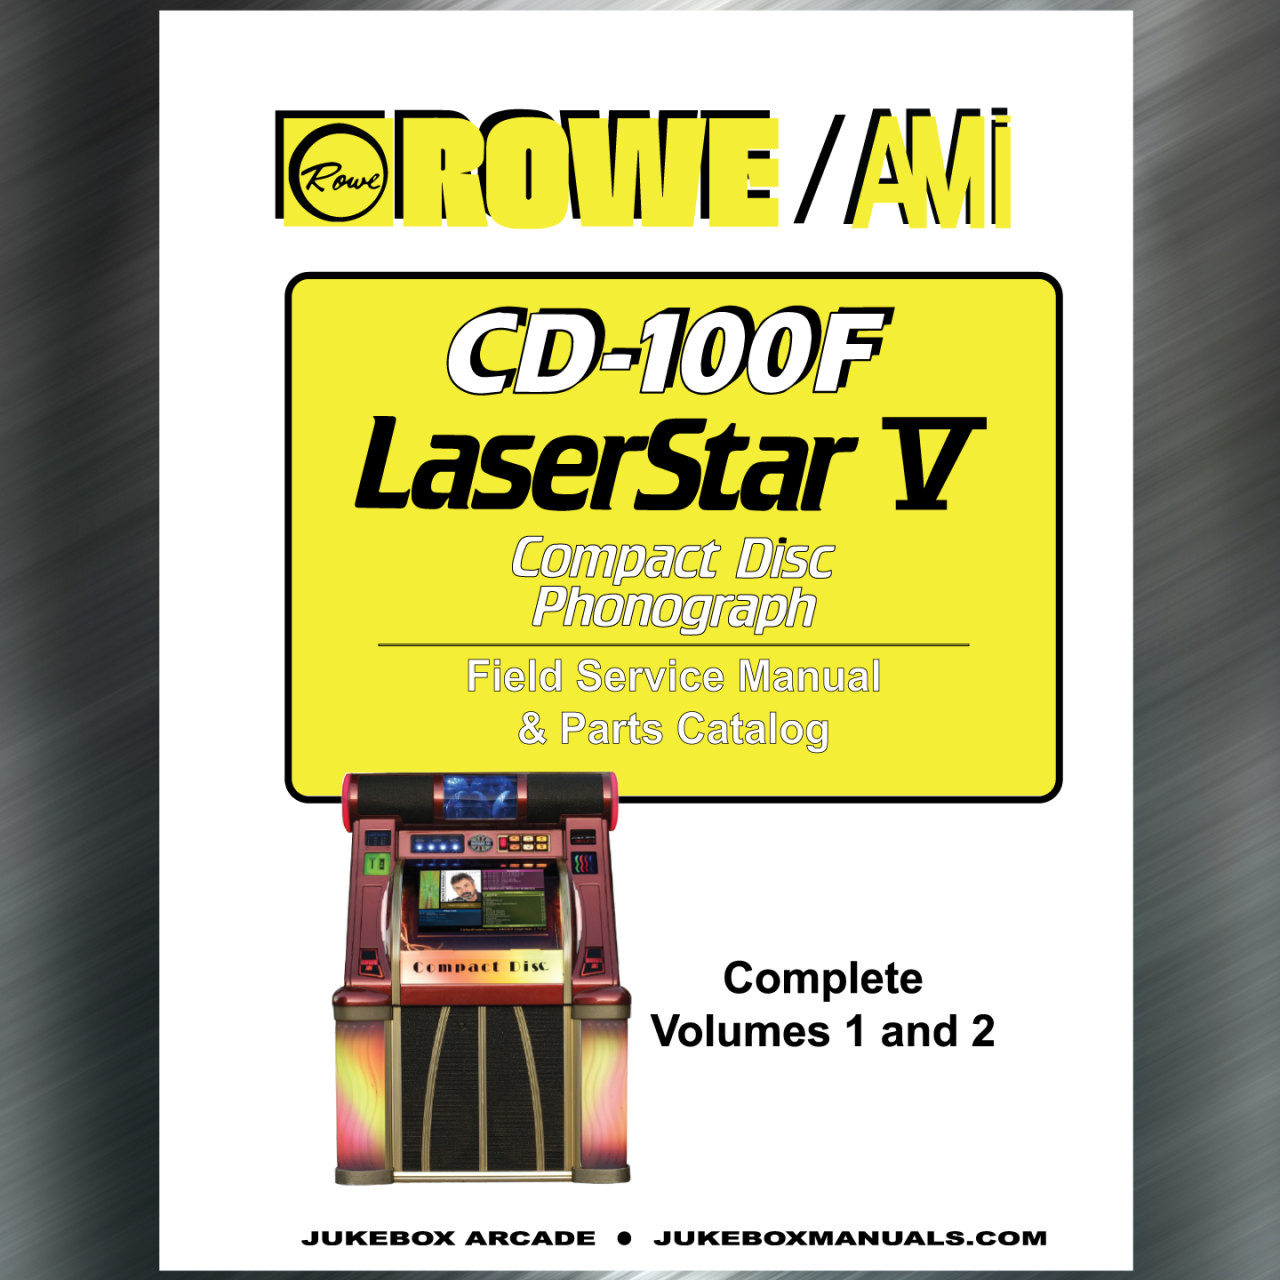 ROWE CD-100B LaserStar Service & Parts Manuals with Troubleshooting 2 Volume Set 